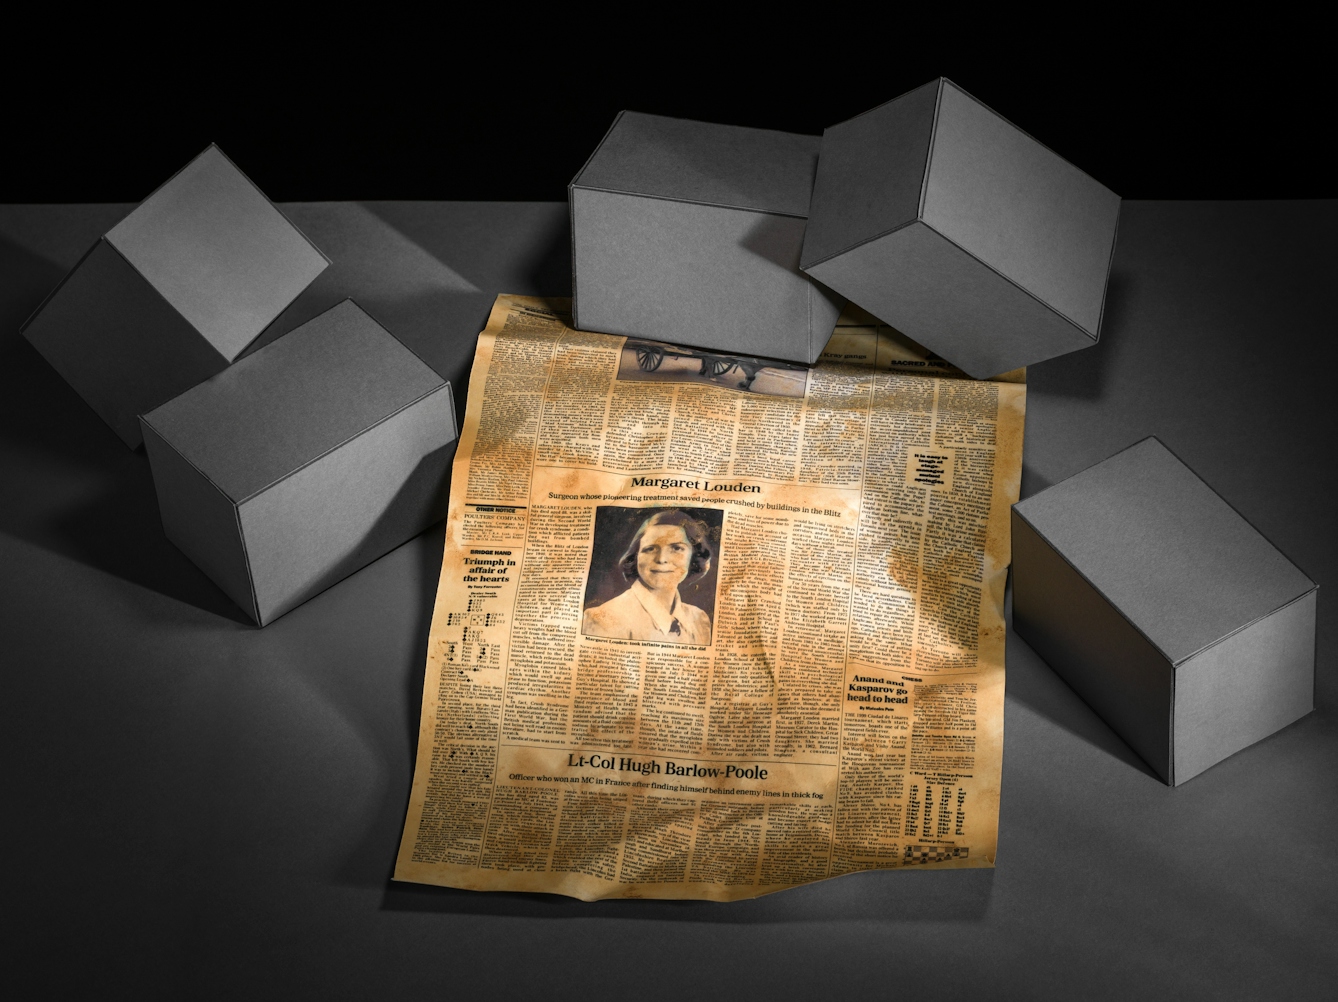 Photograph of a set-built scene made up of a grey card horizontal base against a black vertical background. The view looks down on the surface where there are five rectangular brick blocks scattered in a random arrangement which are also made out of grey cardboard. In the centre of the image and tucked under a couple of the blocks, is an obituary page from a newspaper. It is crumpled and yellowed with age. In the centre of the newspaper is an obituary with a portrait of a young woman with short hair wearing a blouse. Above the portrait is the name Margaret Louden.